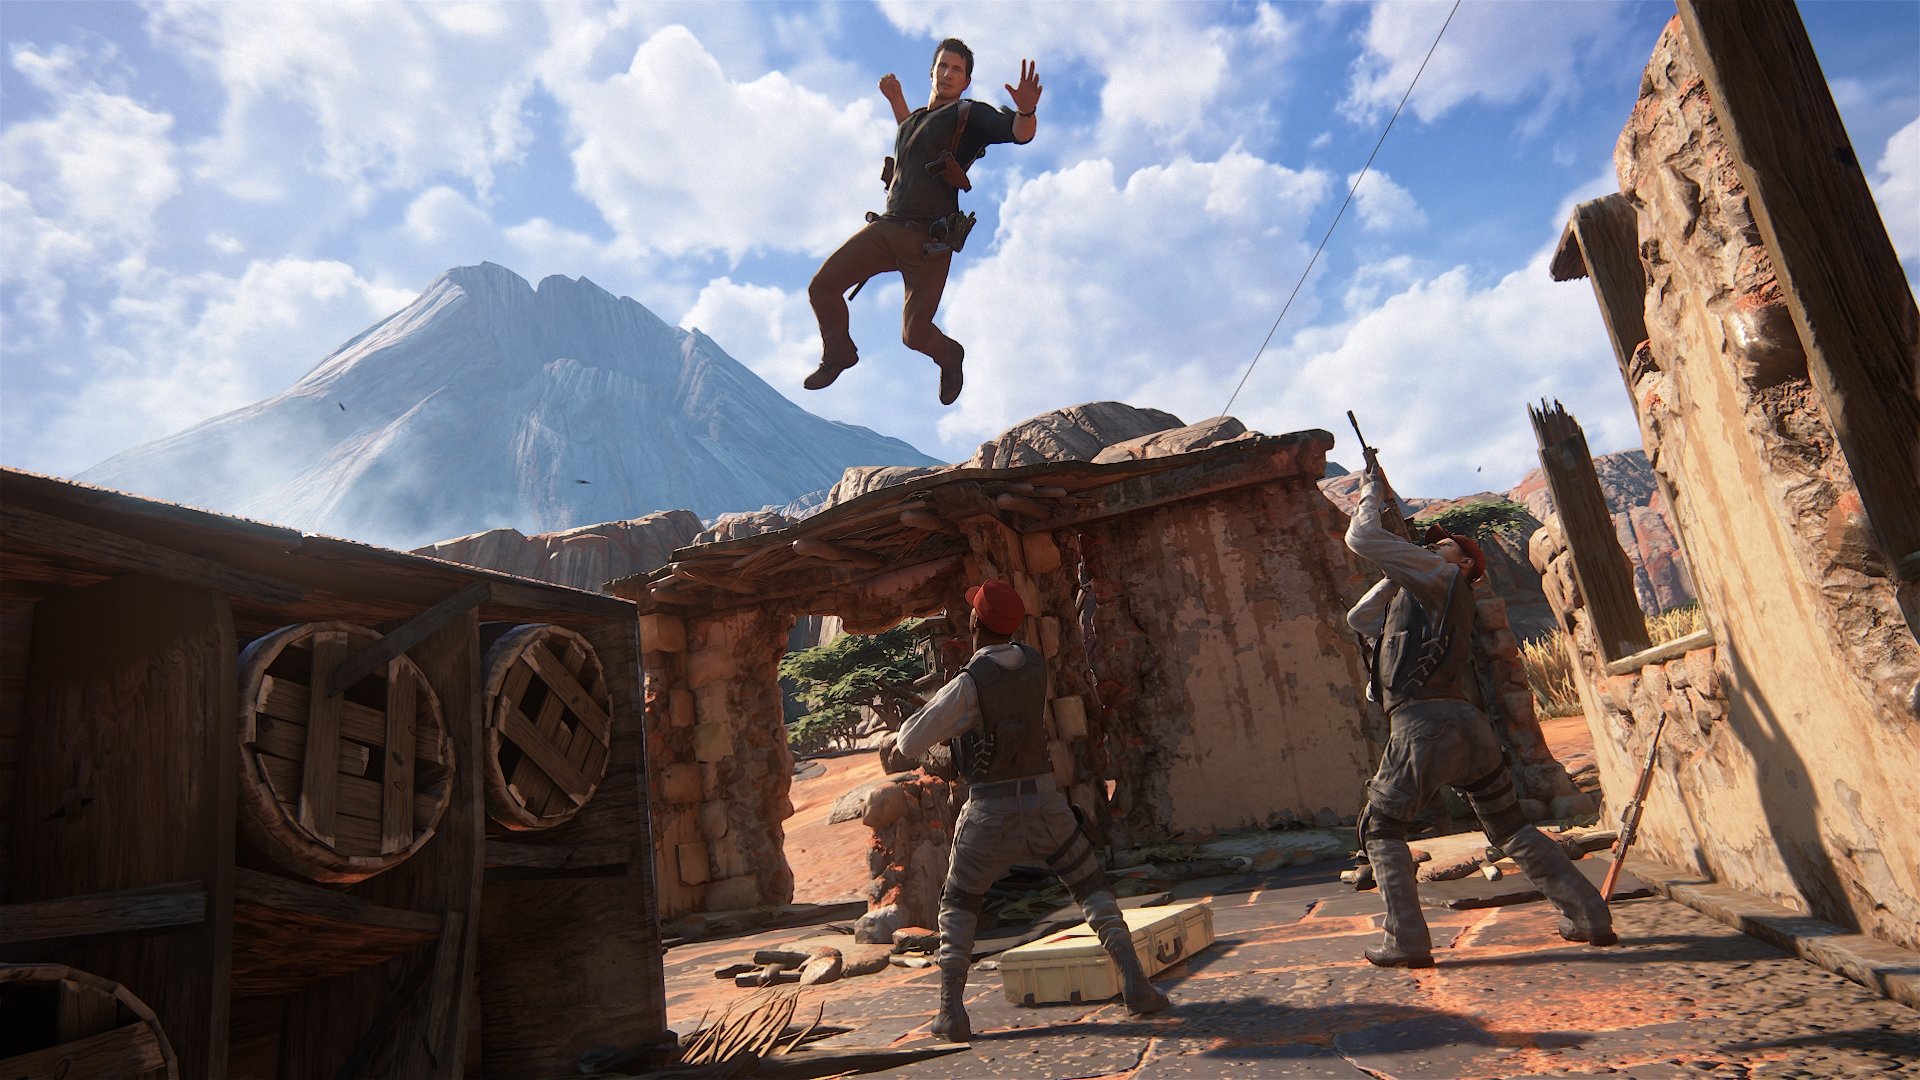 High resolution Uncharted 4: A Thief's End full hd wallpaper ID ...'s End full hd wallpaper ID ...